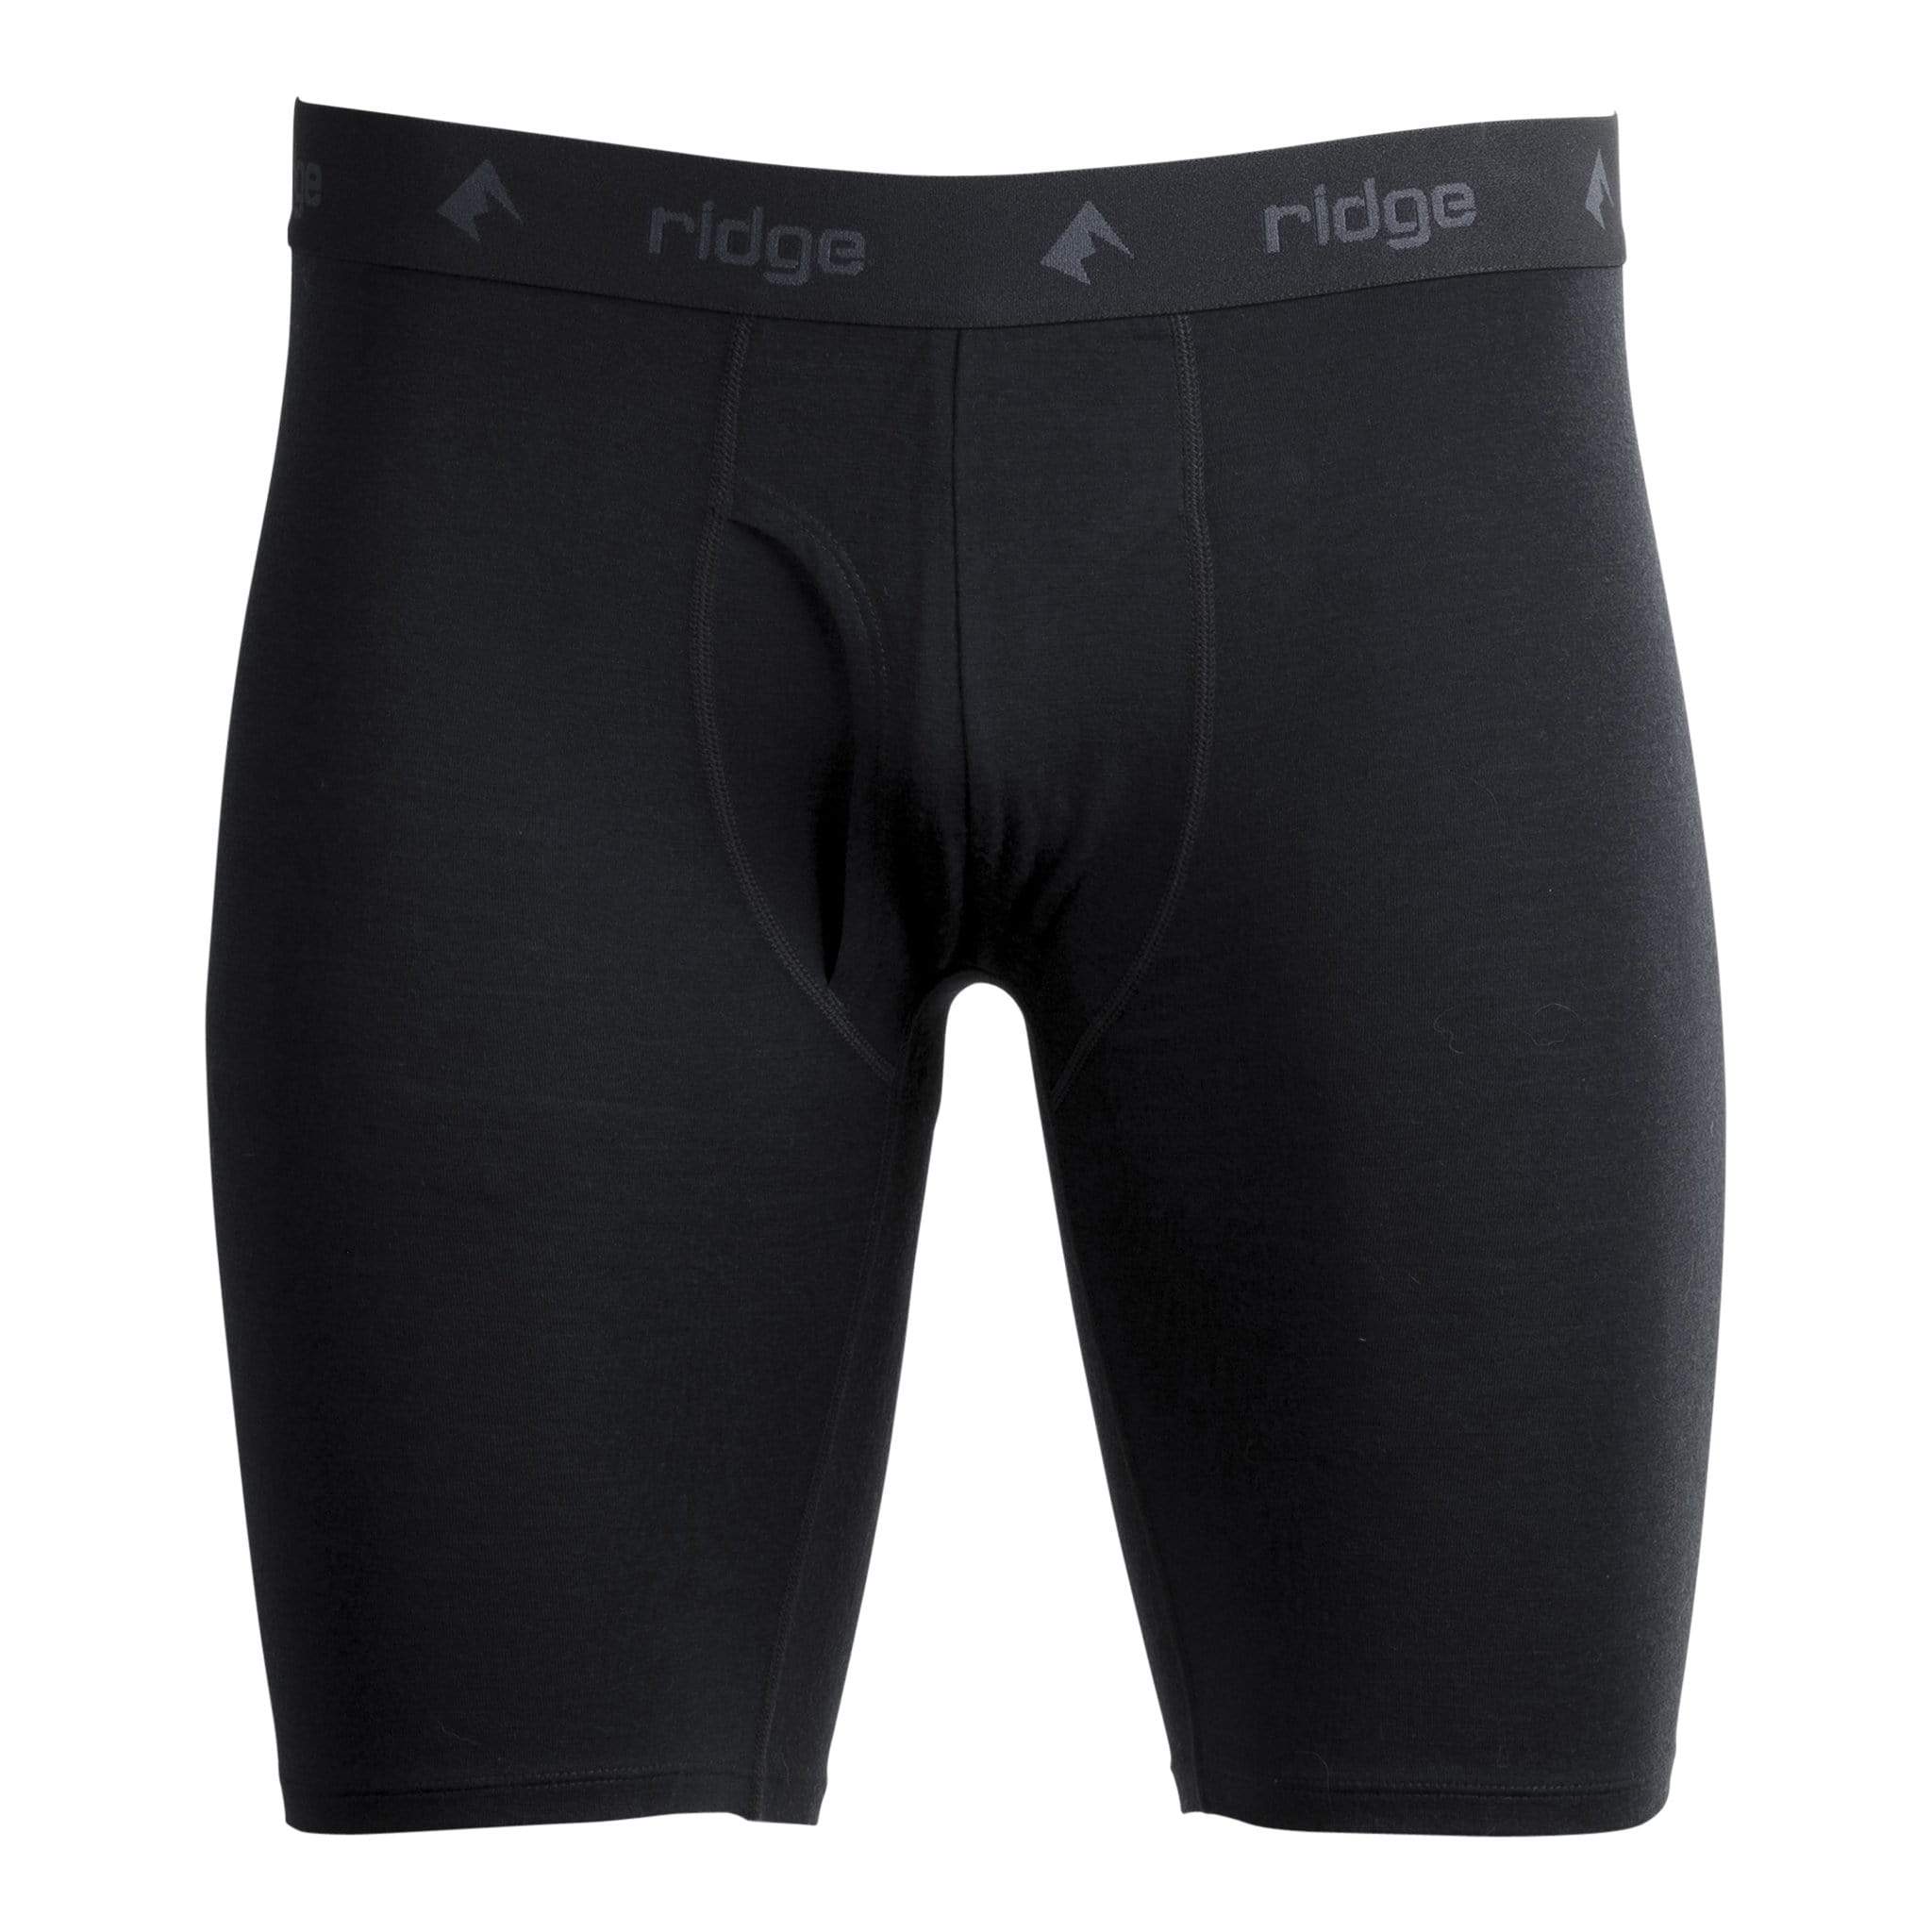 Better Bodies -Classic boxer briefs with performance abilities.